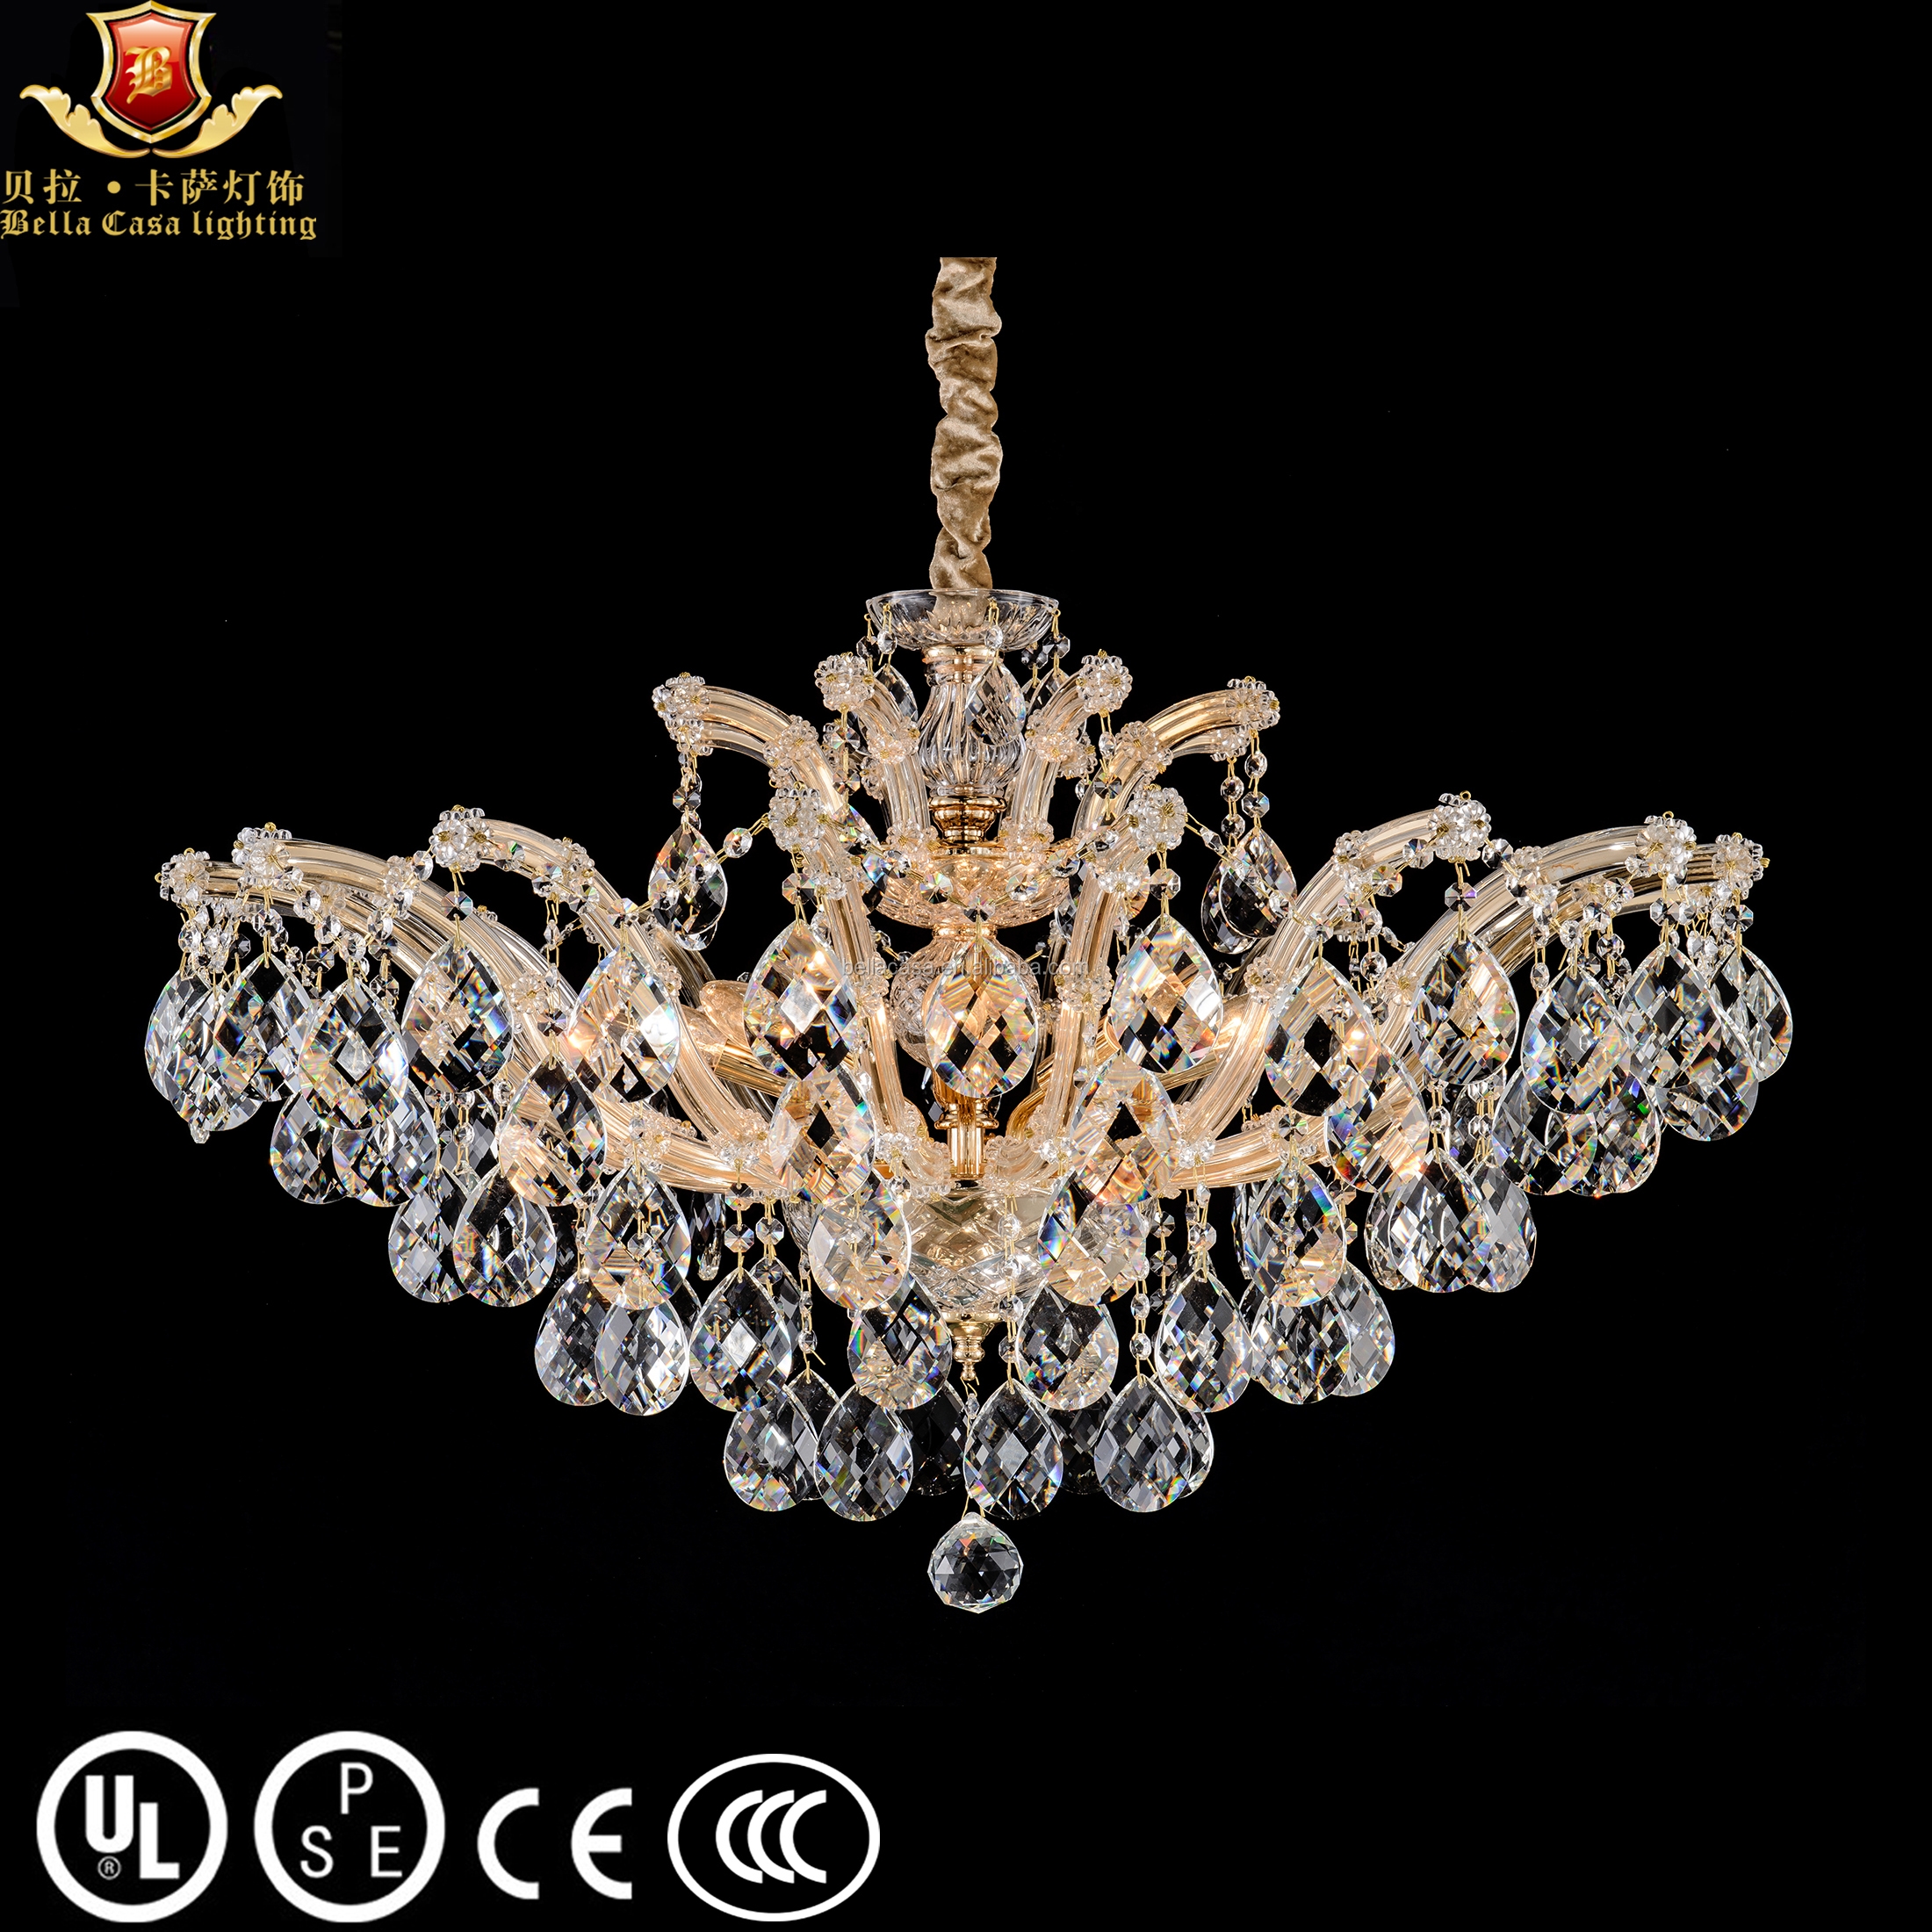 Luxury crystal chandeliers modern glass hanging lamps living room hotel decorative ceiling lighting